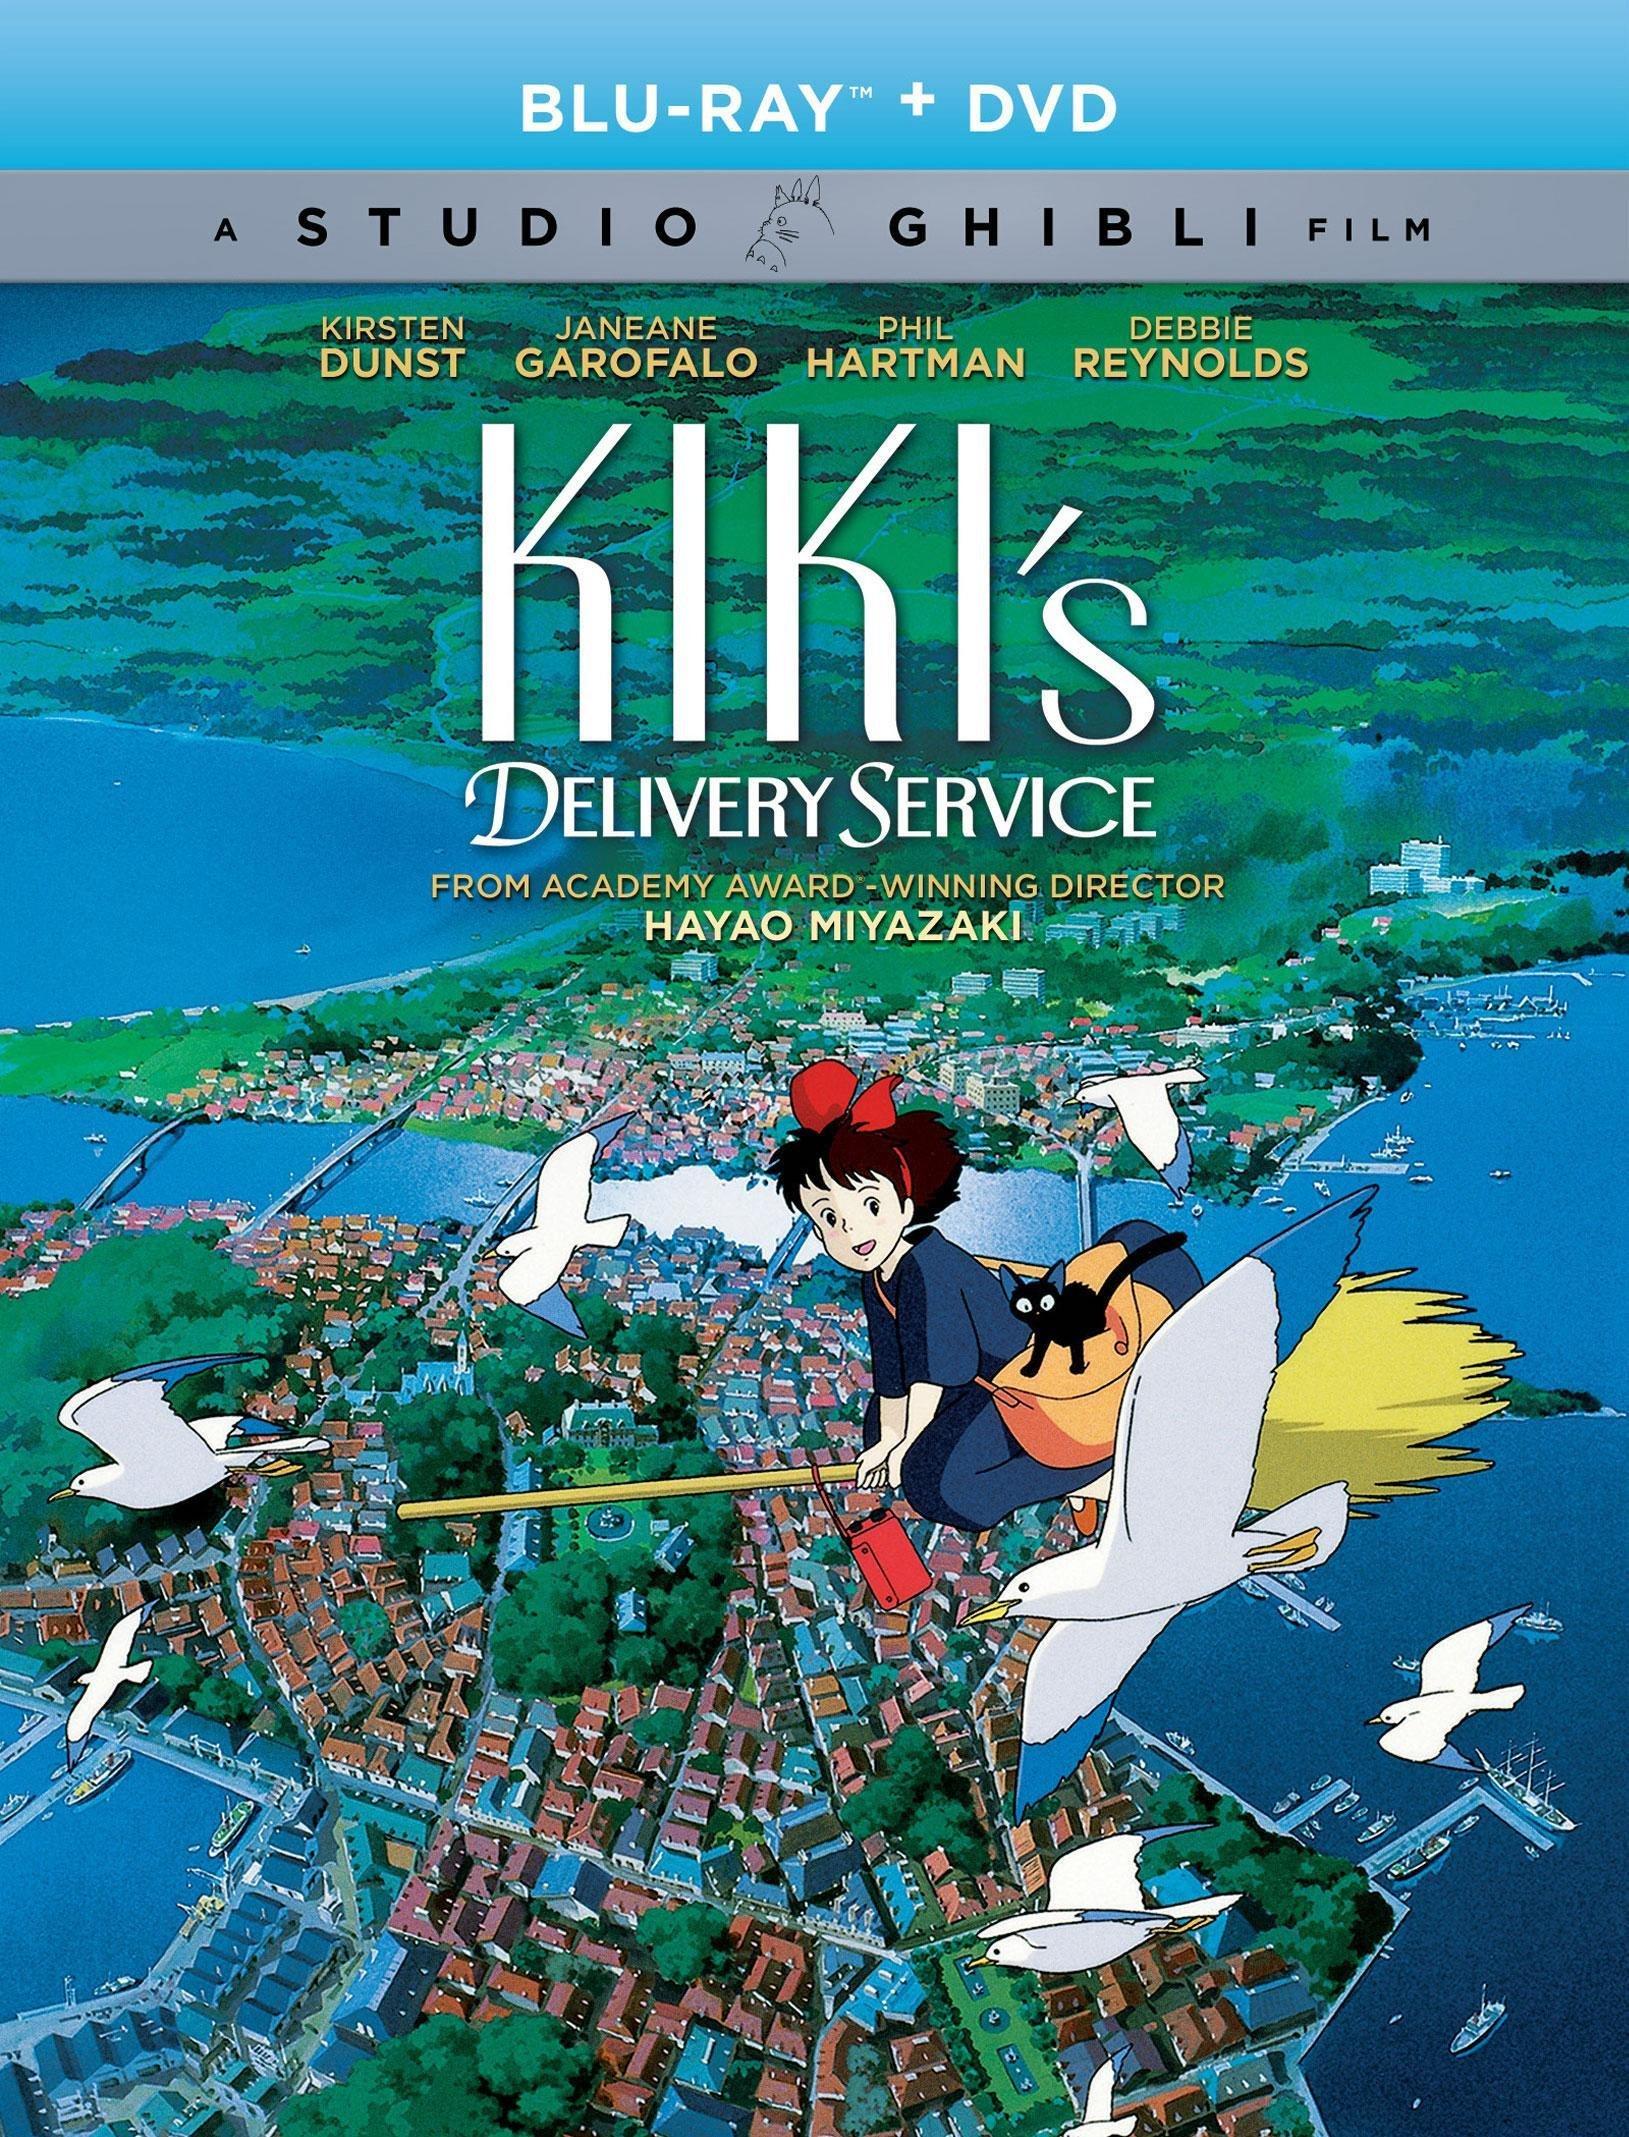 Kiki's Delivery Service Movie - Blu-ray and DVD